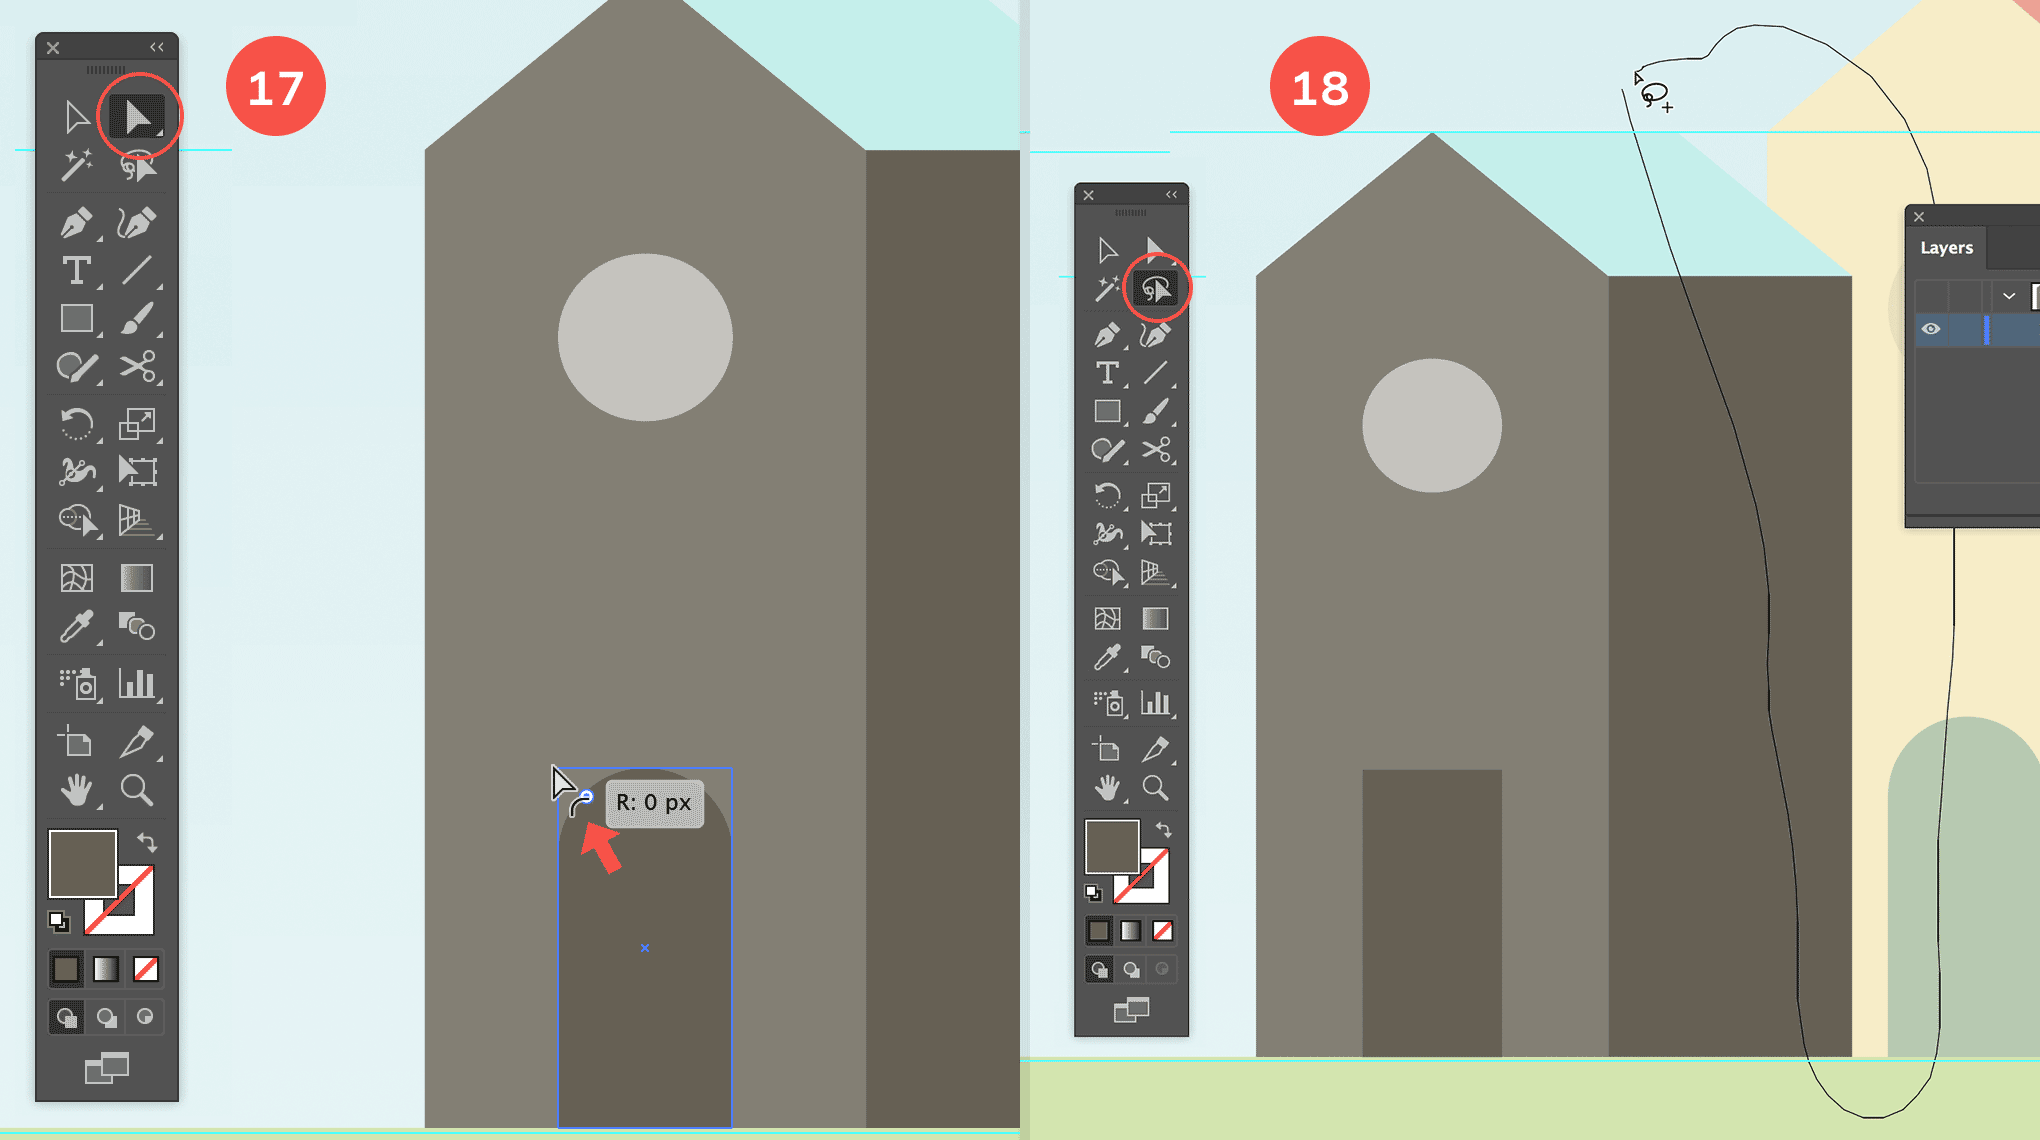 Adjust the door, and select the right part of the house to resize it